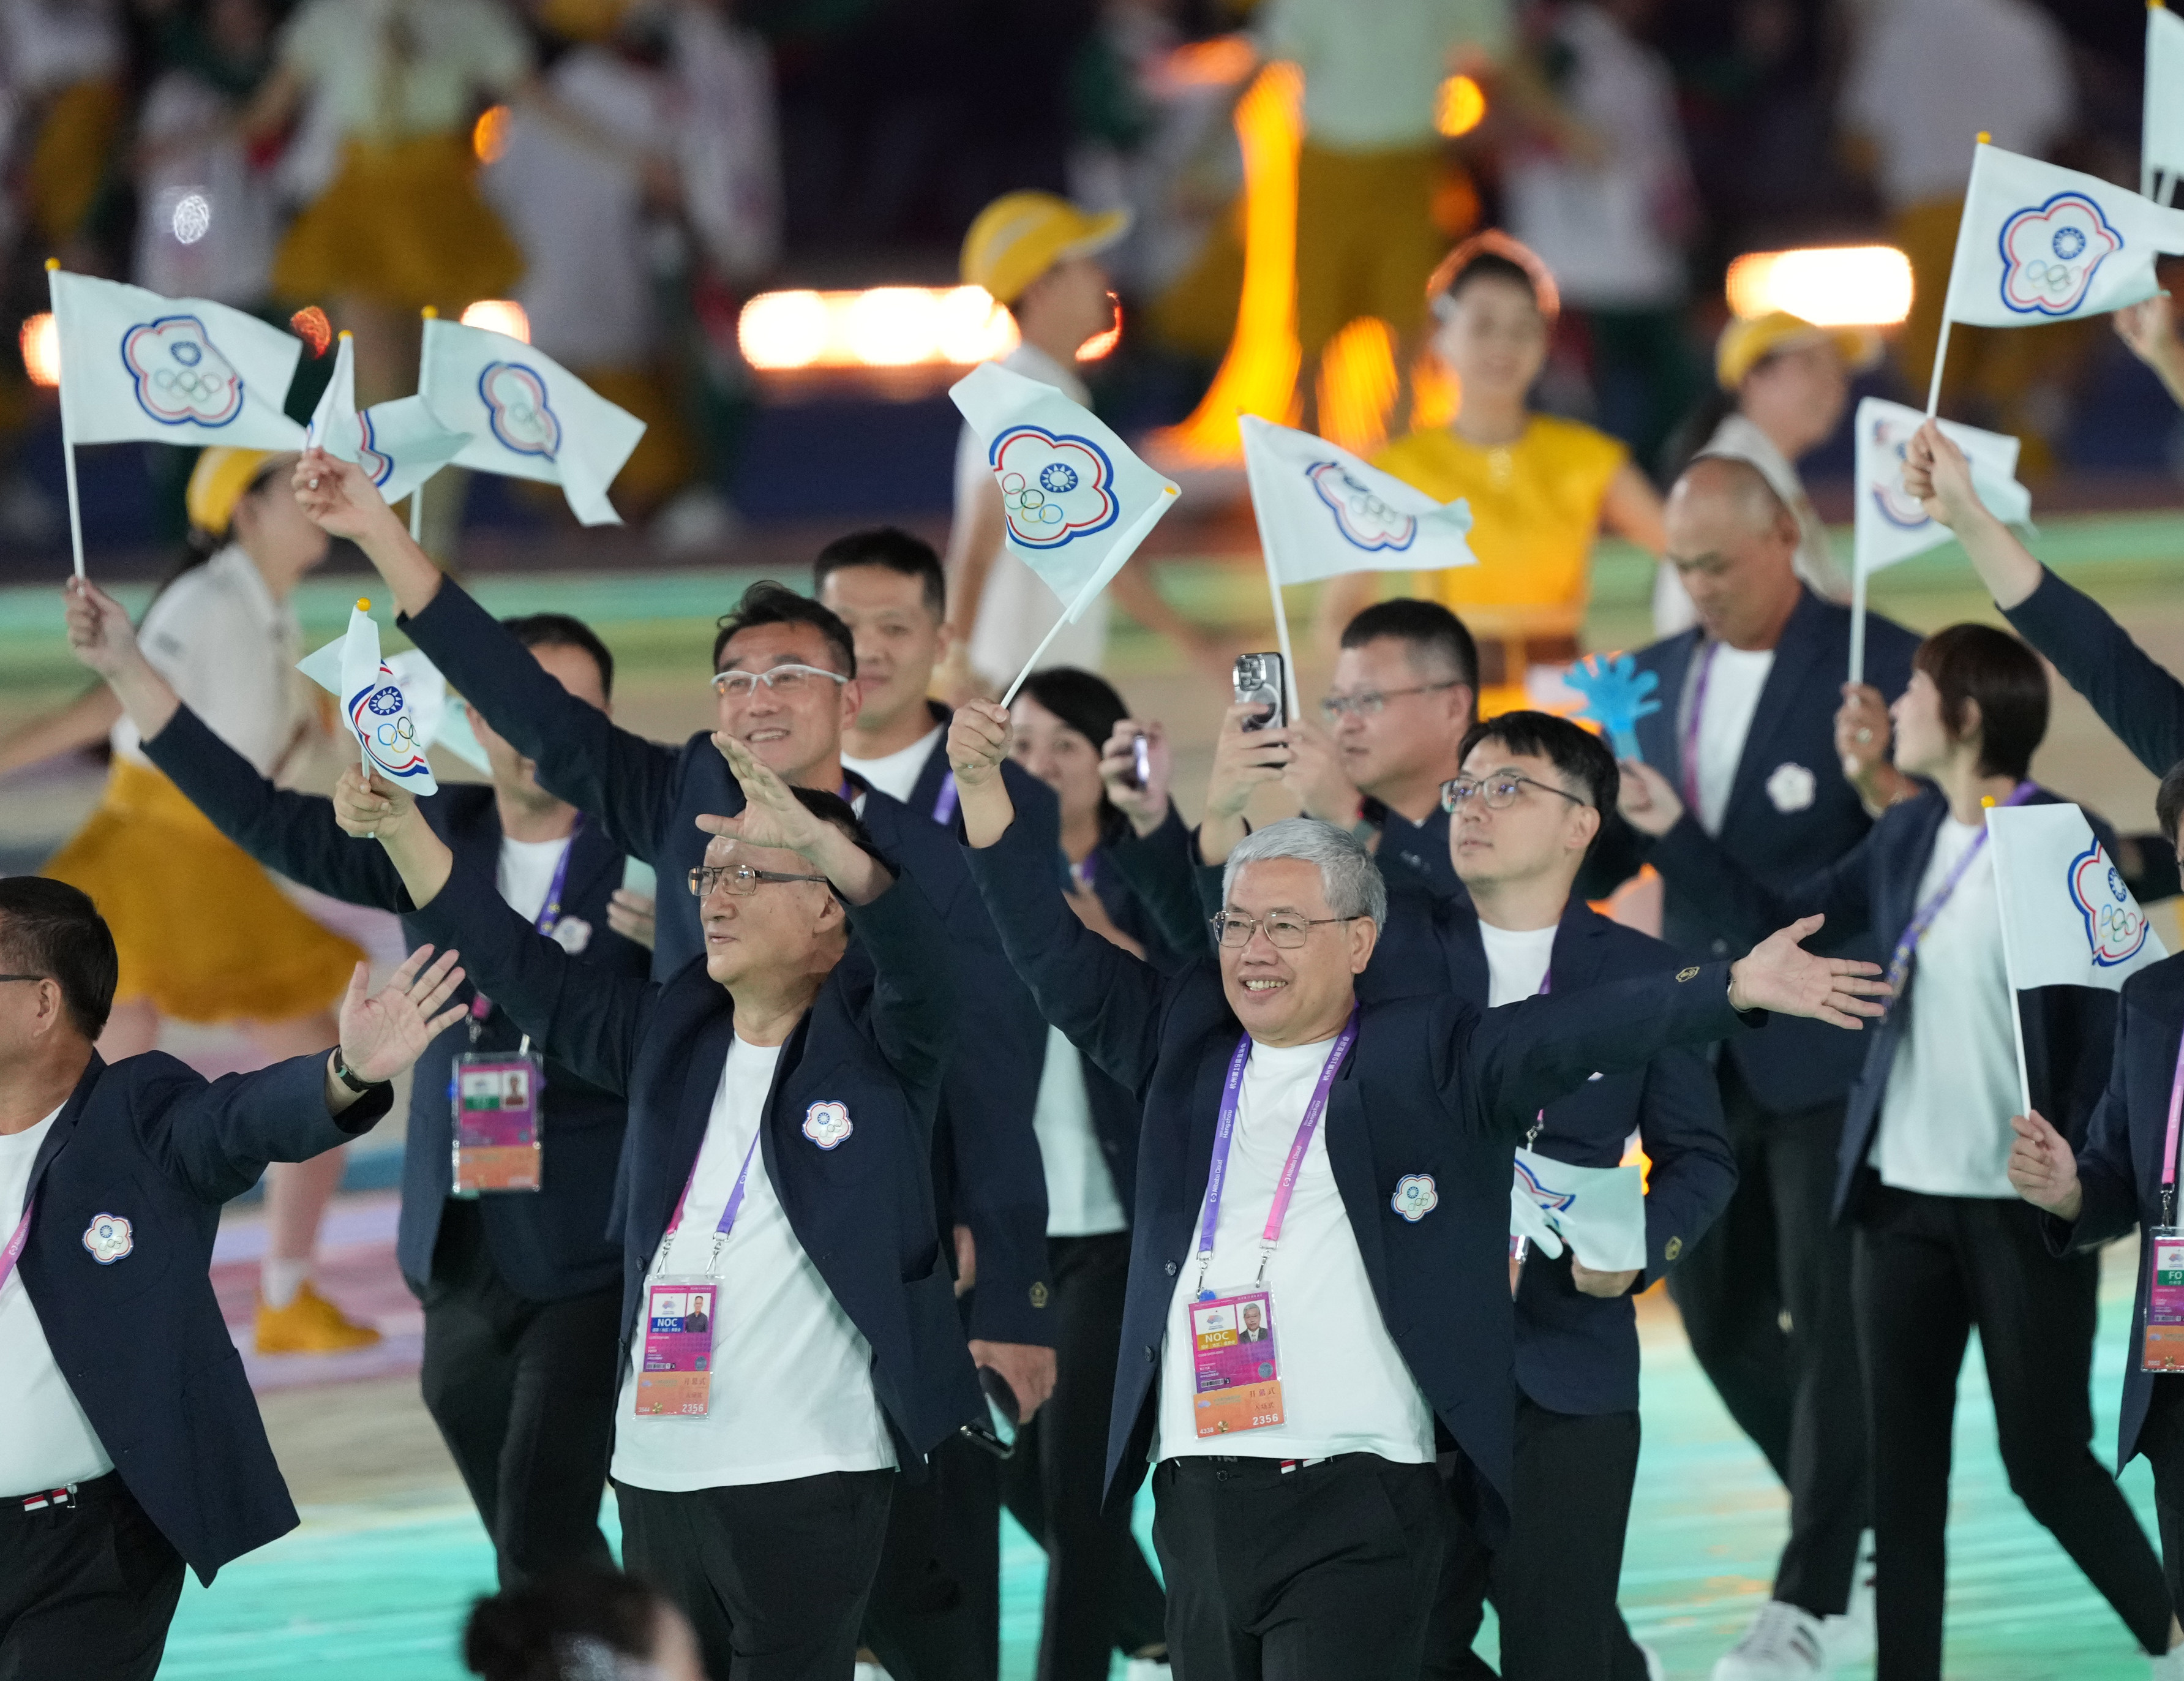 The Chinese Taipei delegation parades into the Hangzhou Olympic Sports Centre during the opening ceremony of the 19th Asian Games in Hangzhou in Zhejiang Province on September 23. Photo: Xinhua